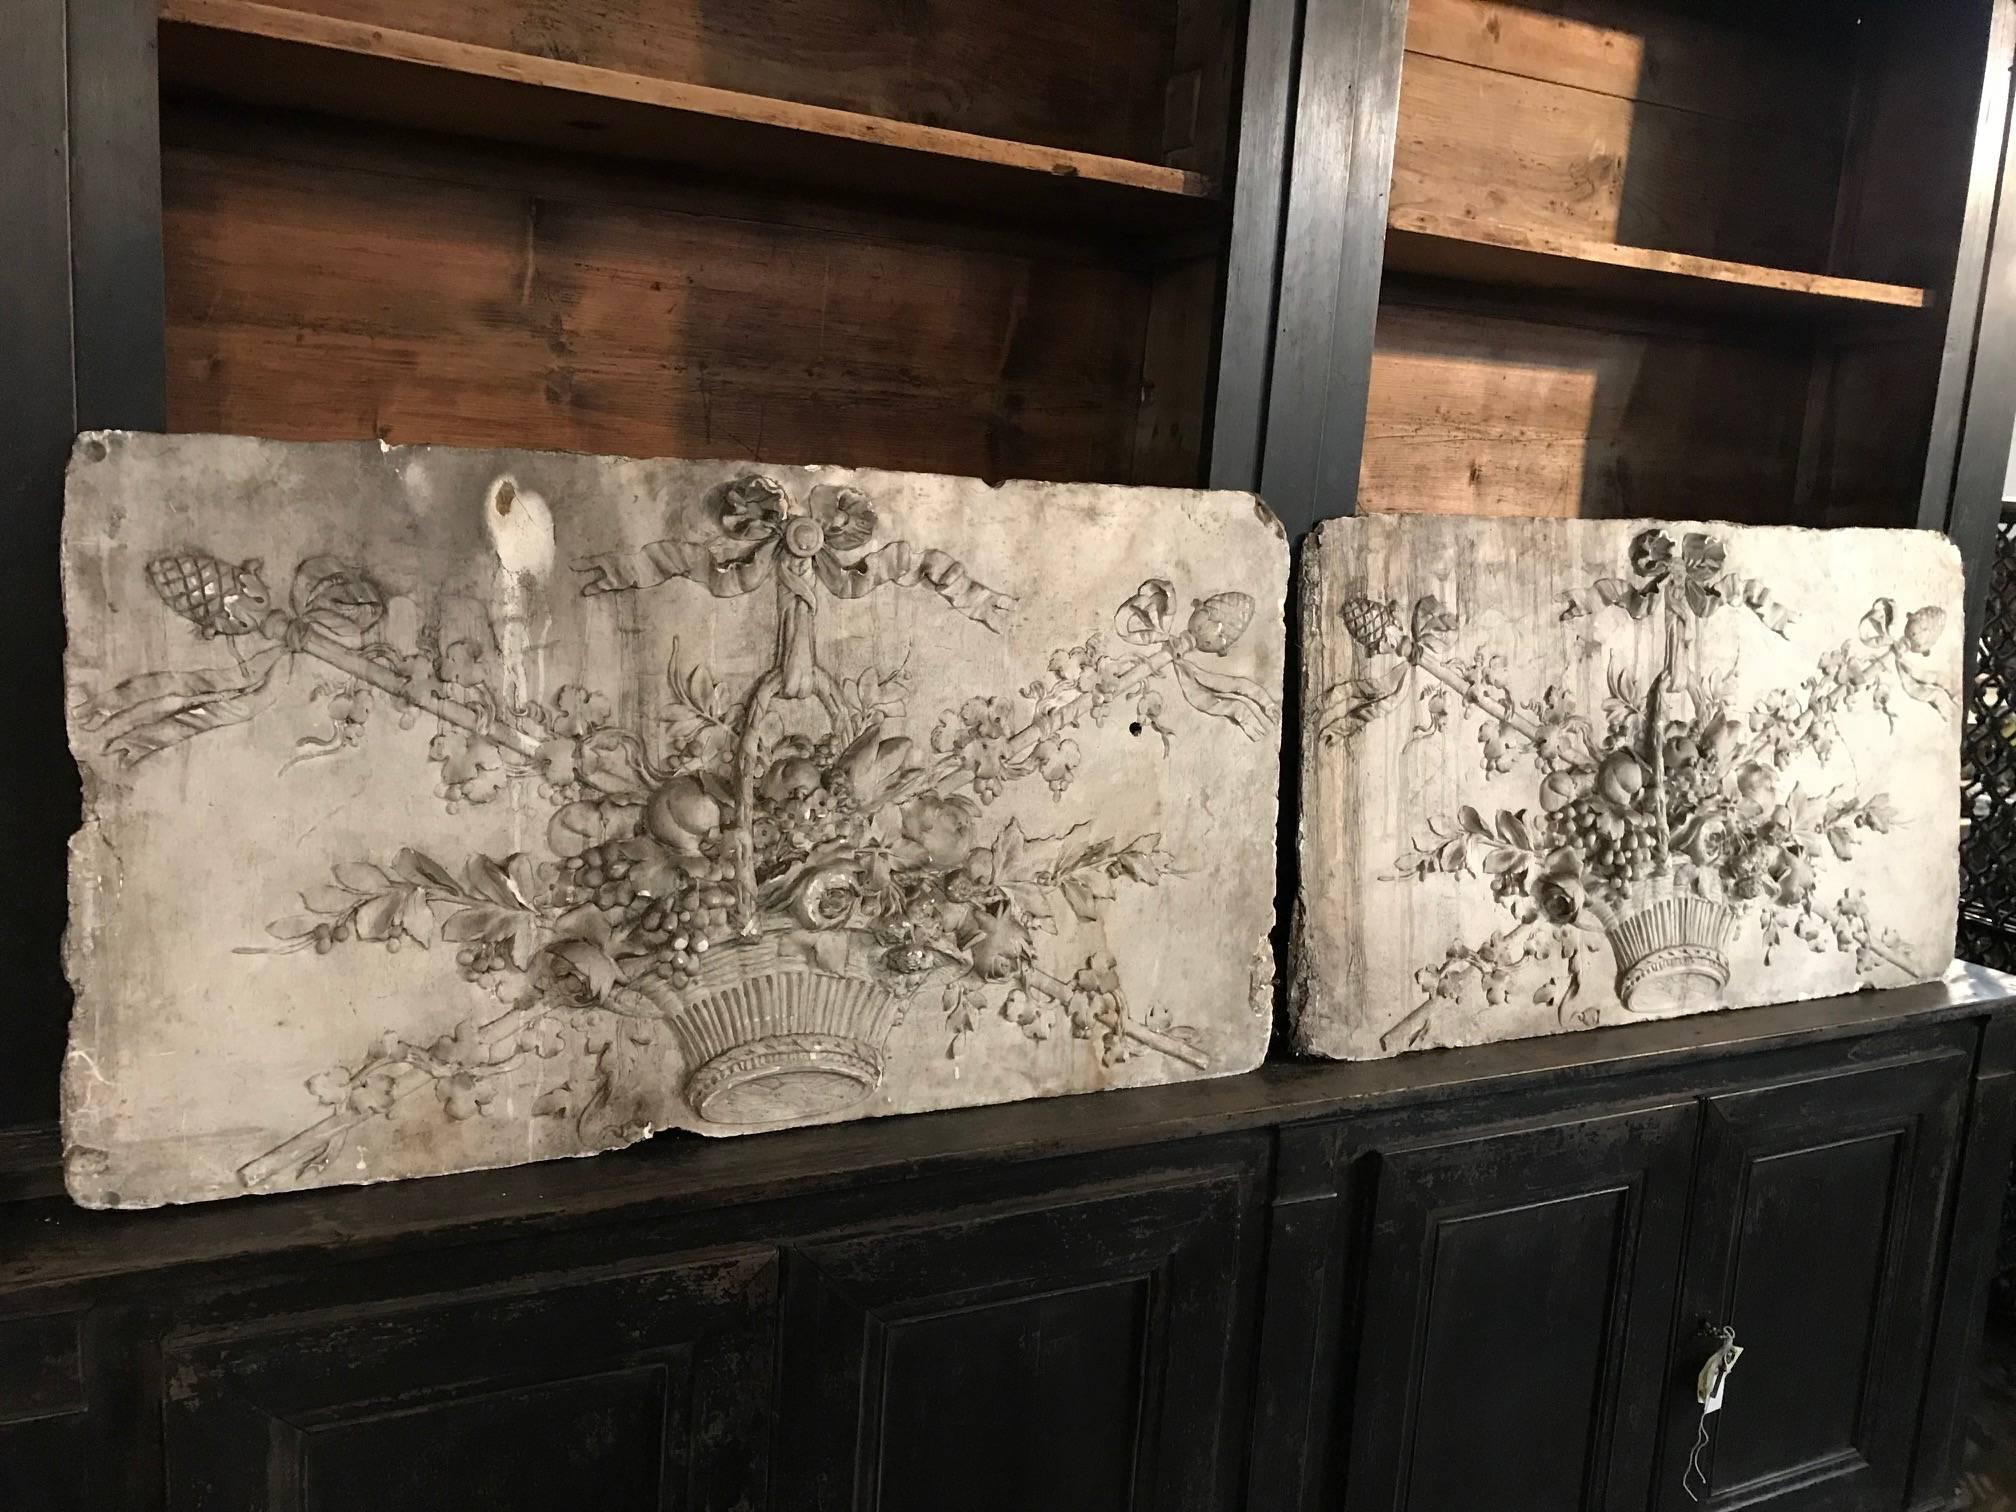 A stunning pair of French Louis XVI style boiserie panels in plastered wood. Wonderful art pieces from the Loire Valley region of France. Beautiful to frame.